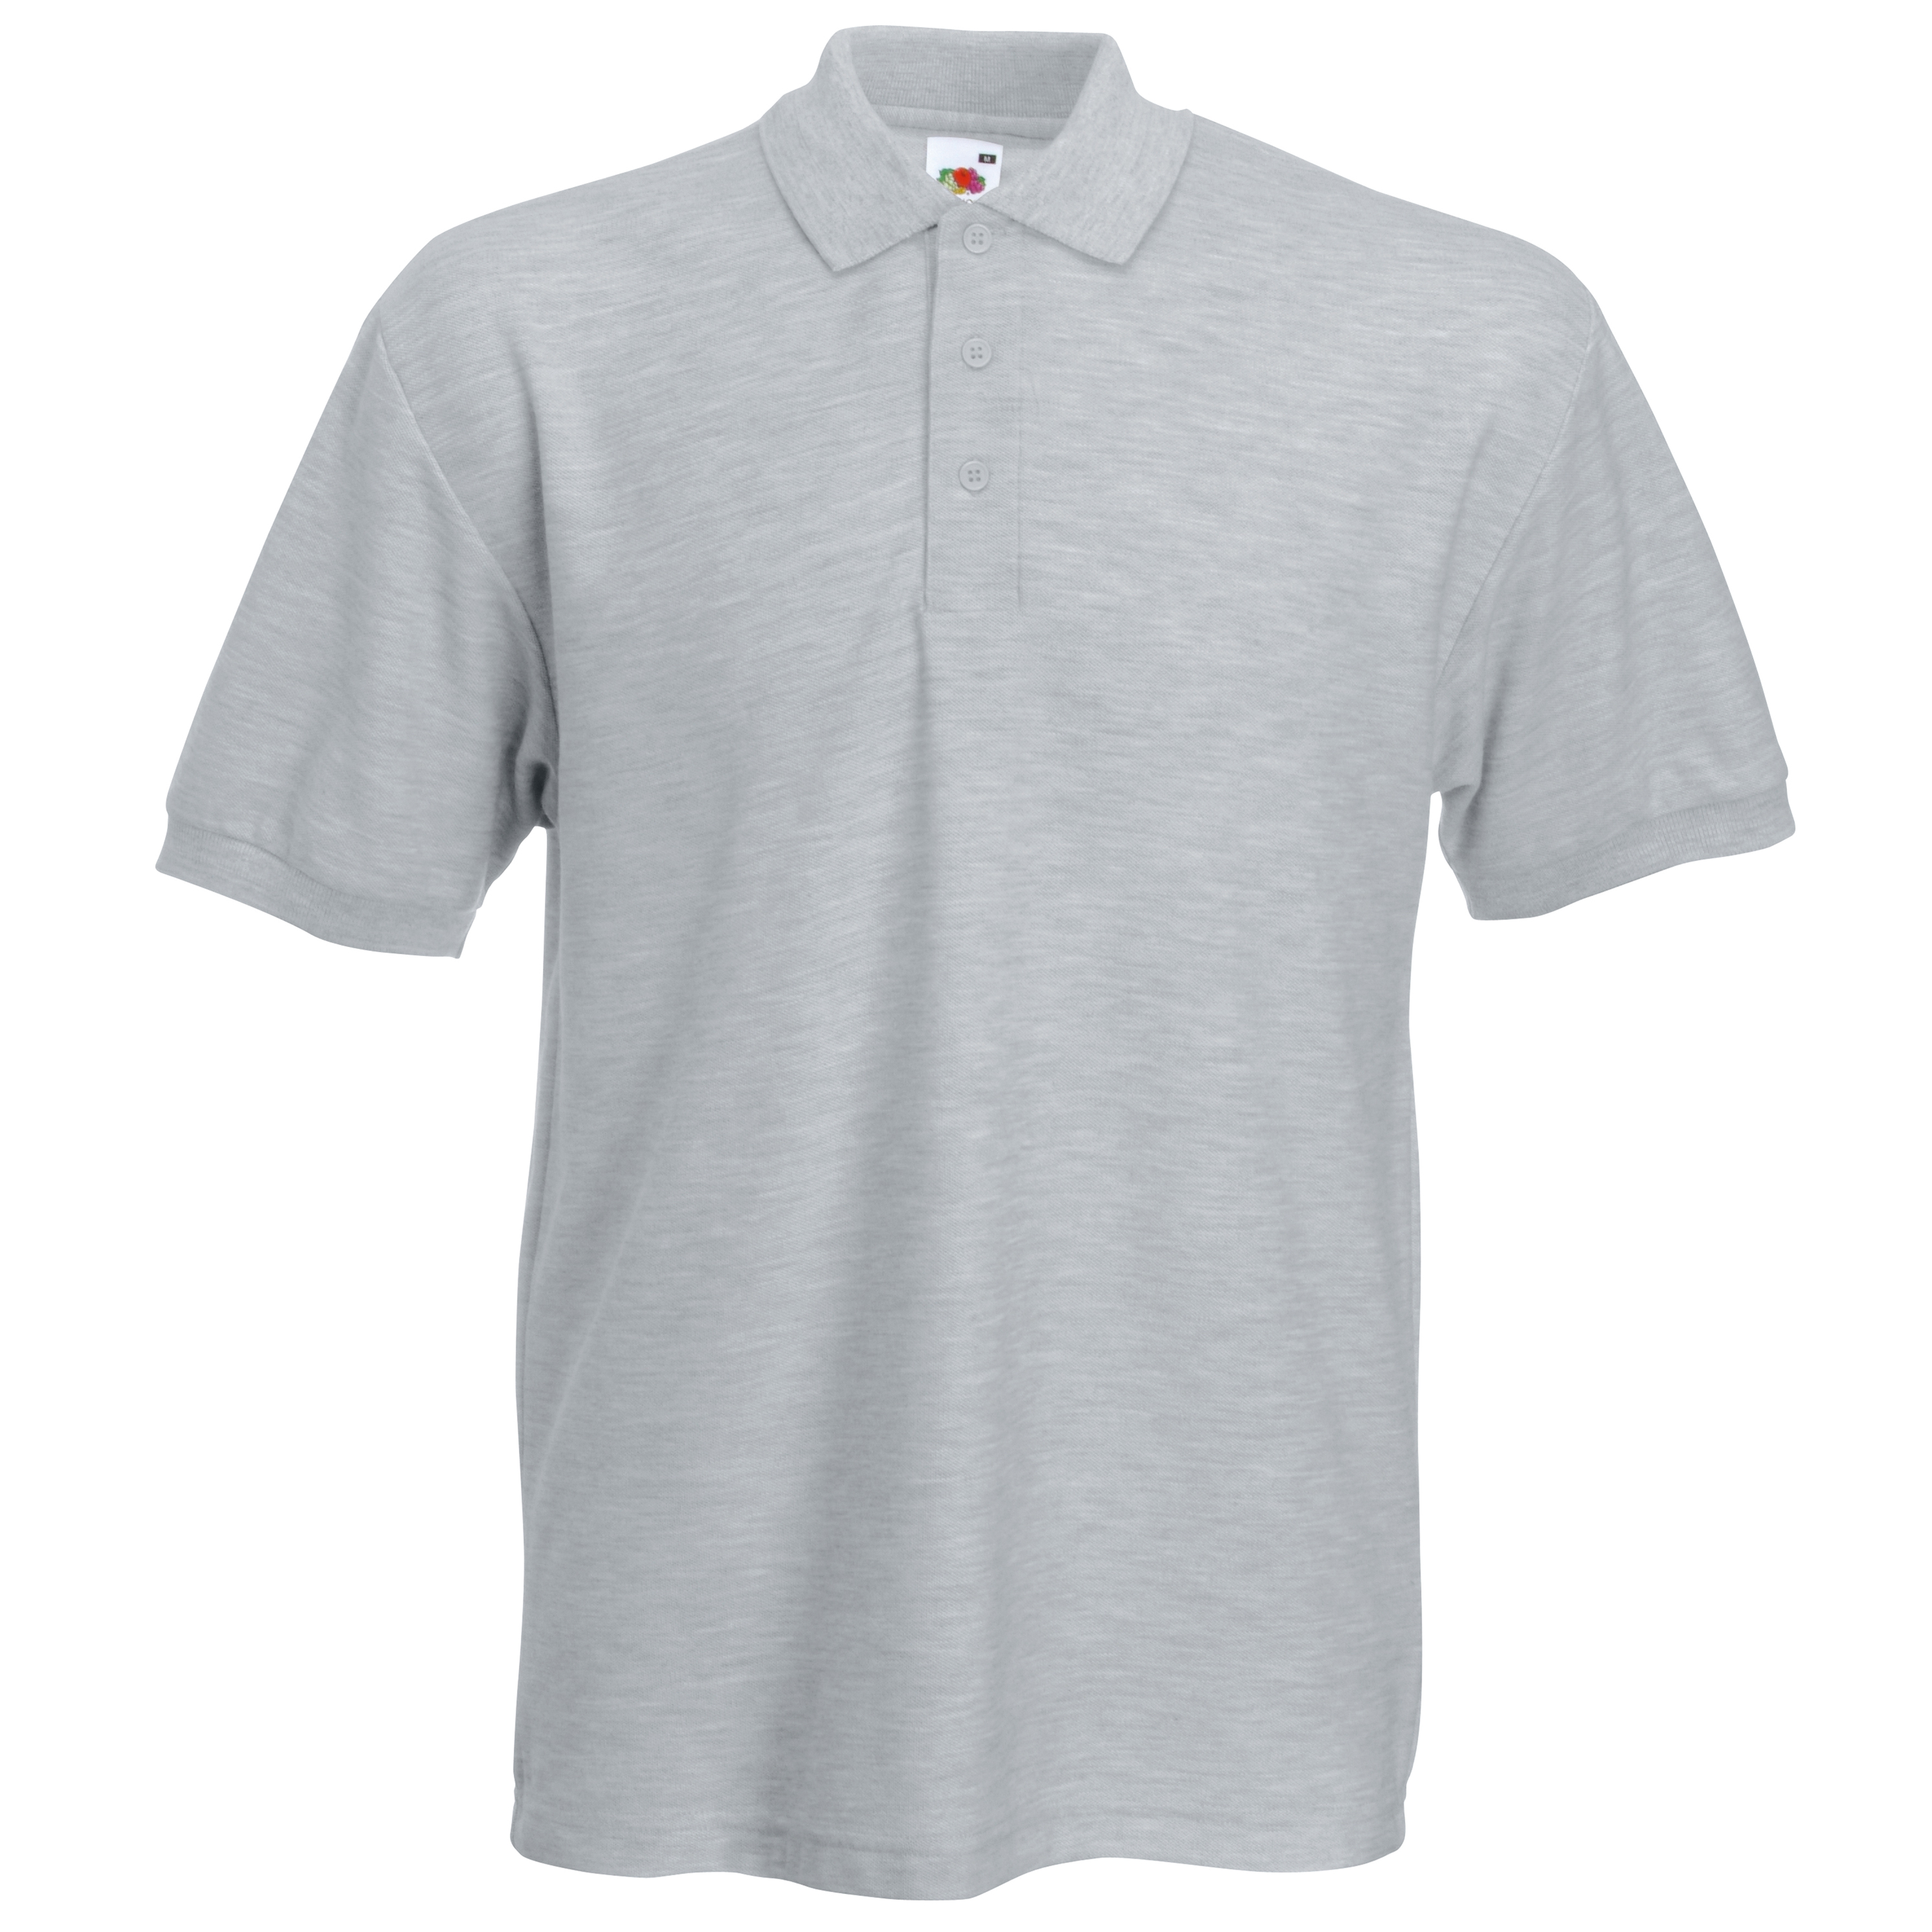 ax-httpswebsystems.s3.amazonaws.comtmp_for_downloadfruit-of-the-loom-heavyweight-65-35-polo-heather-grey.jpg